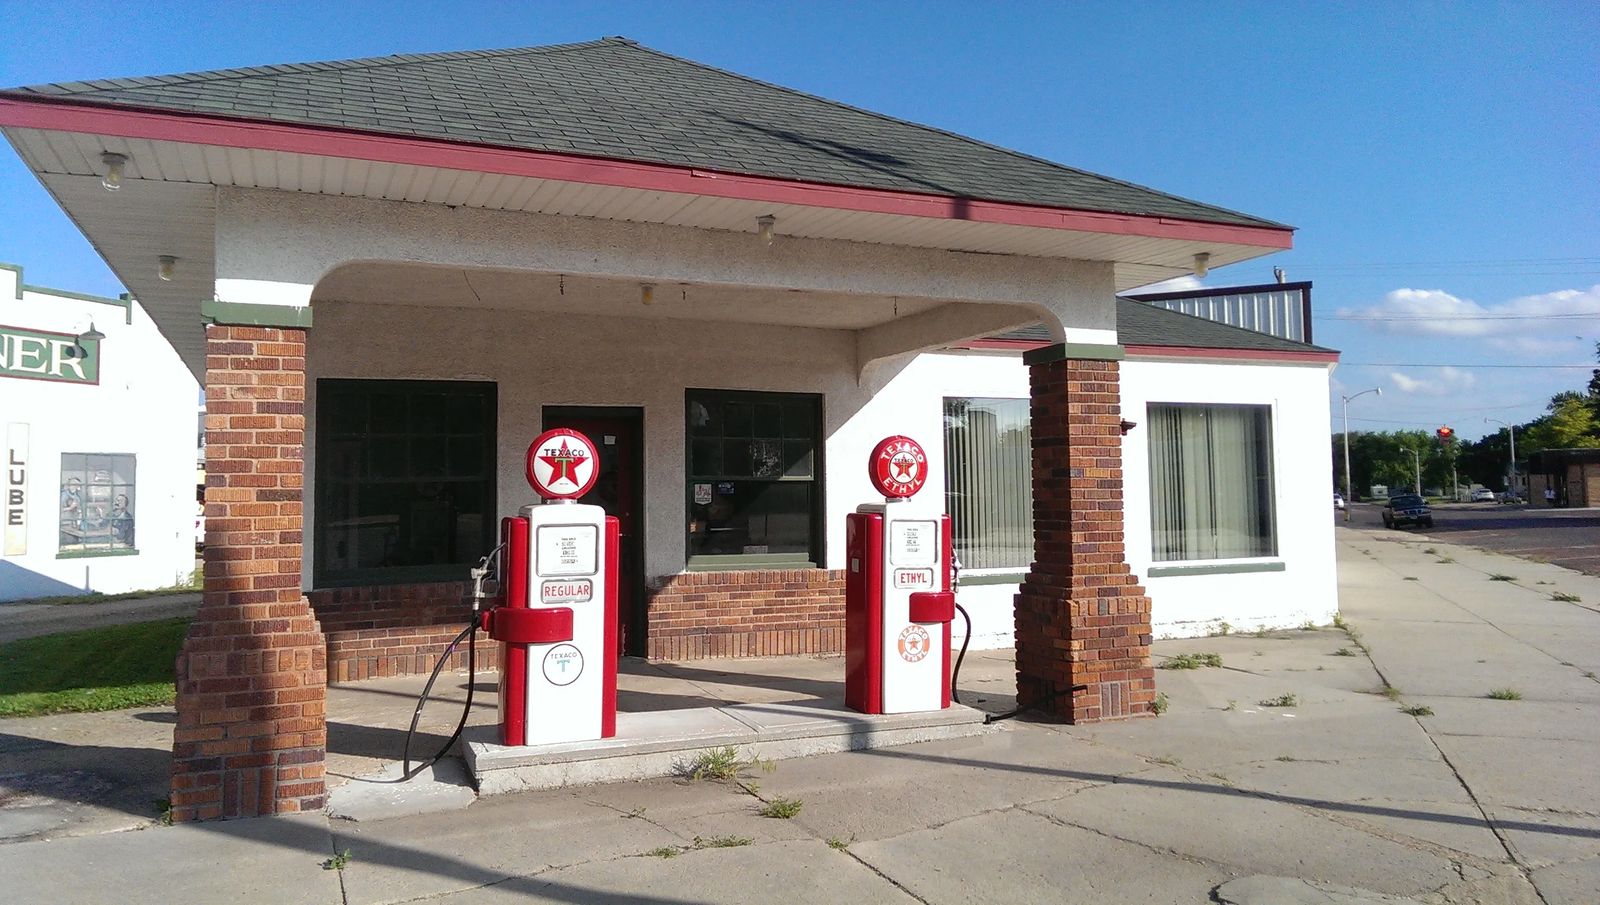 Photo of two antique gas pumps, one for Ethyl and one for Regular, in St. Paul, Nebraska